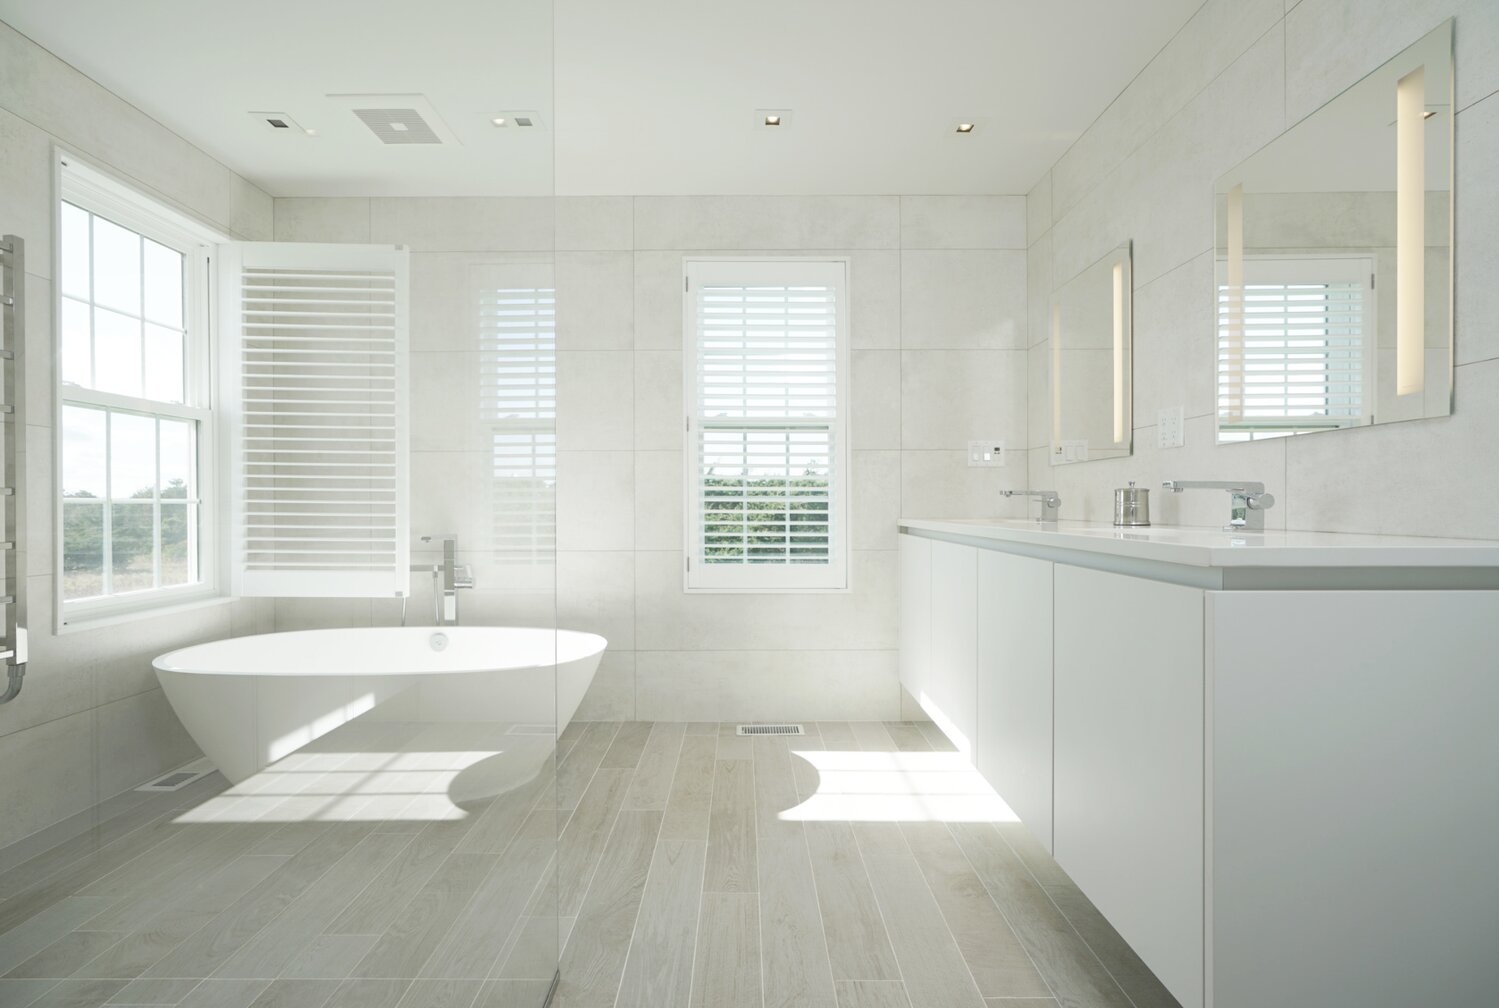 This bathroom has dual vanities, a soaking tub, glass-enclosed shower and plenty of natural light.